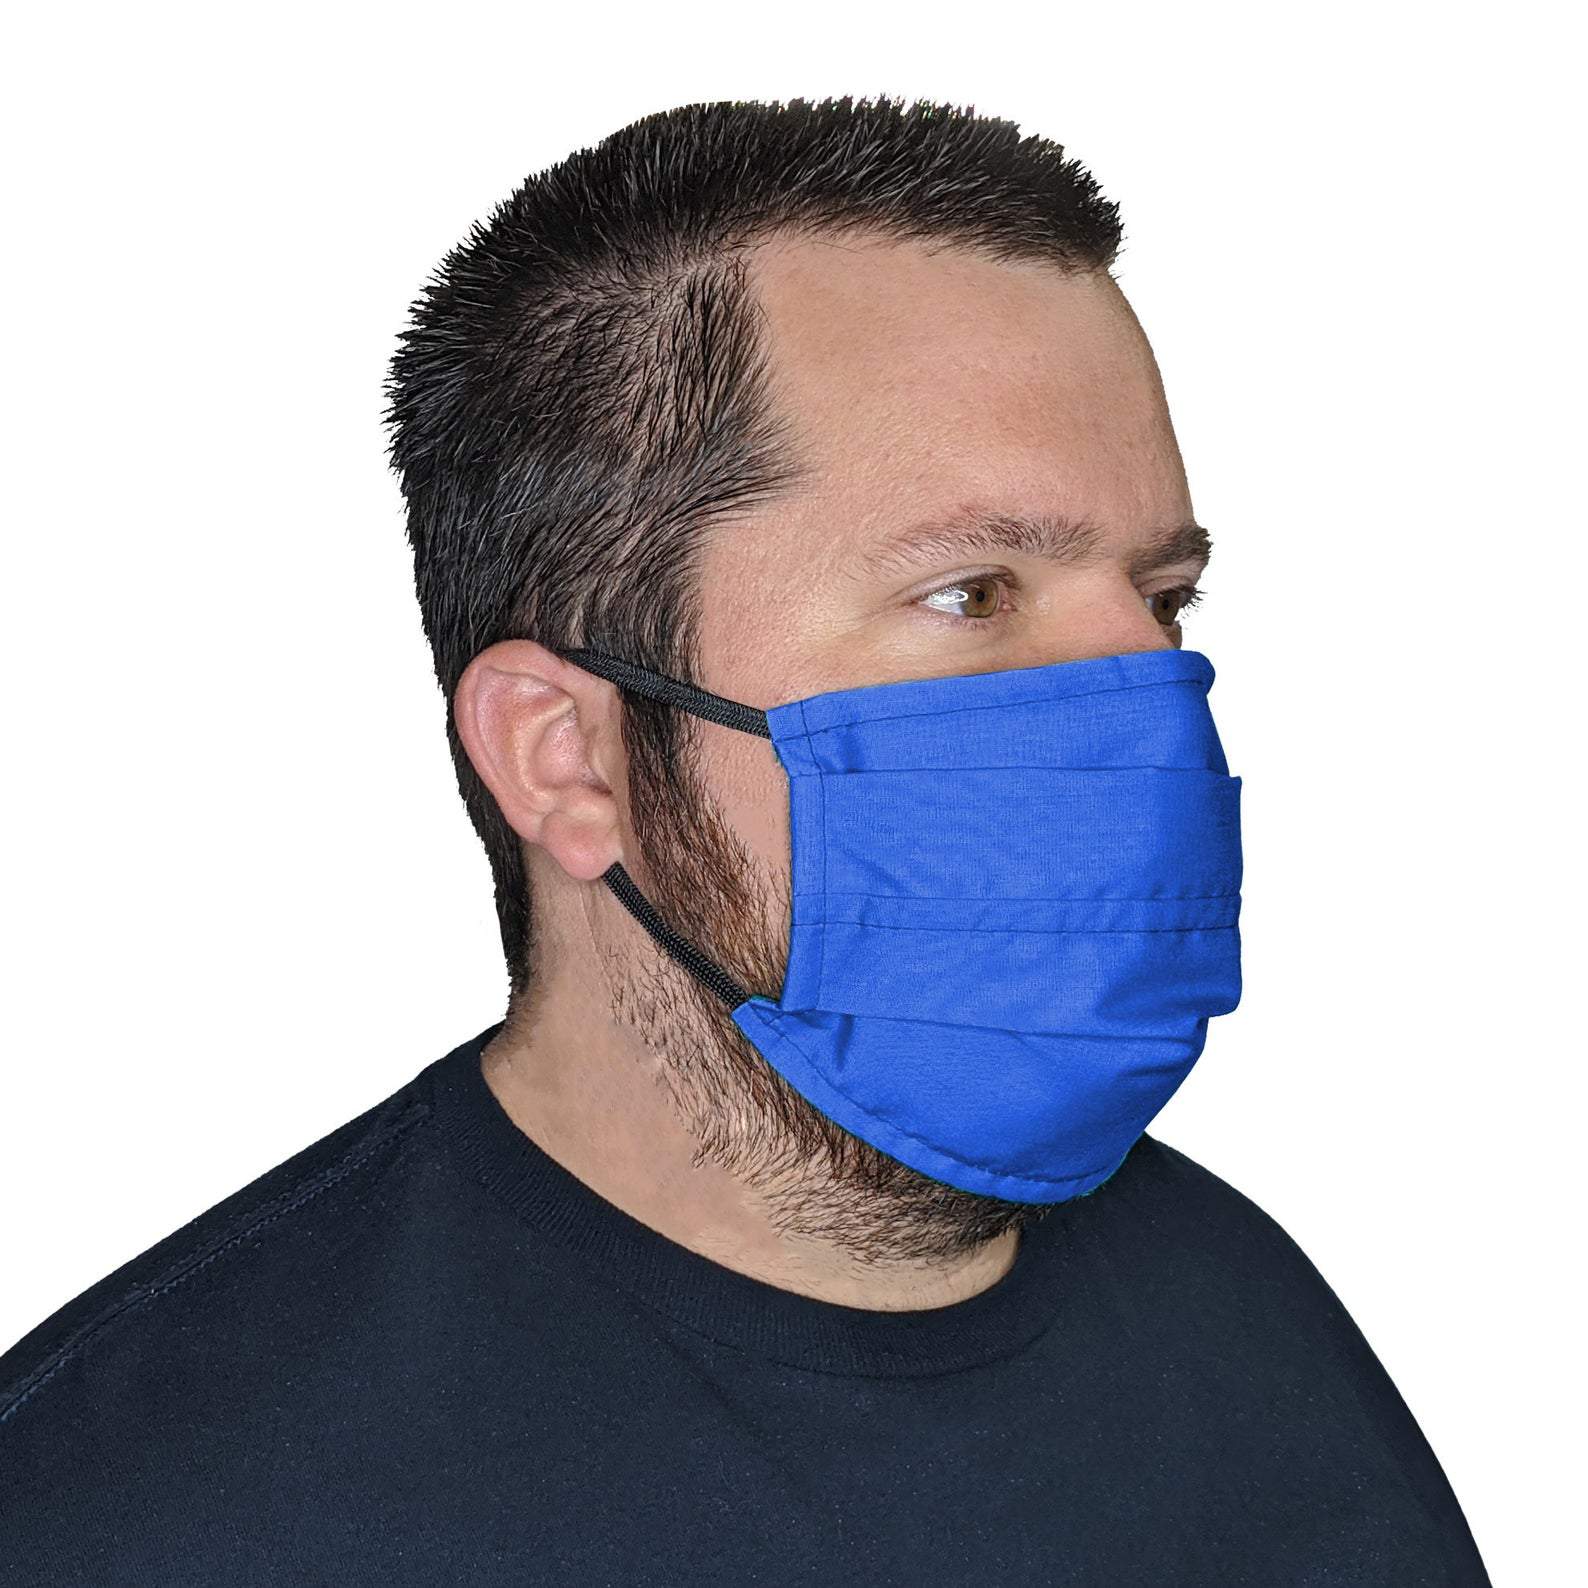 XXXL Face Mask- Reusable & Washable with Cotton Blend Fabric Face Mask Square Up Fashions Royal Blue 1 Individual 